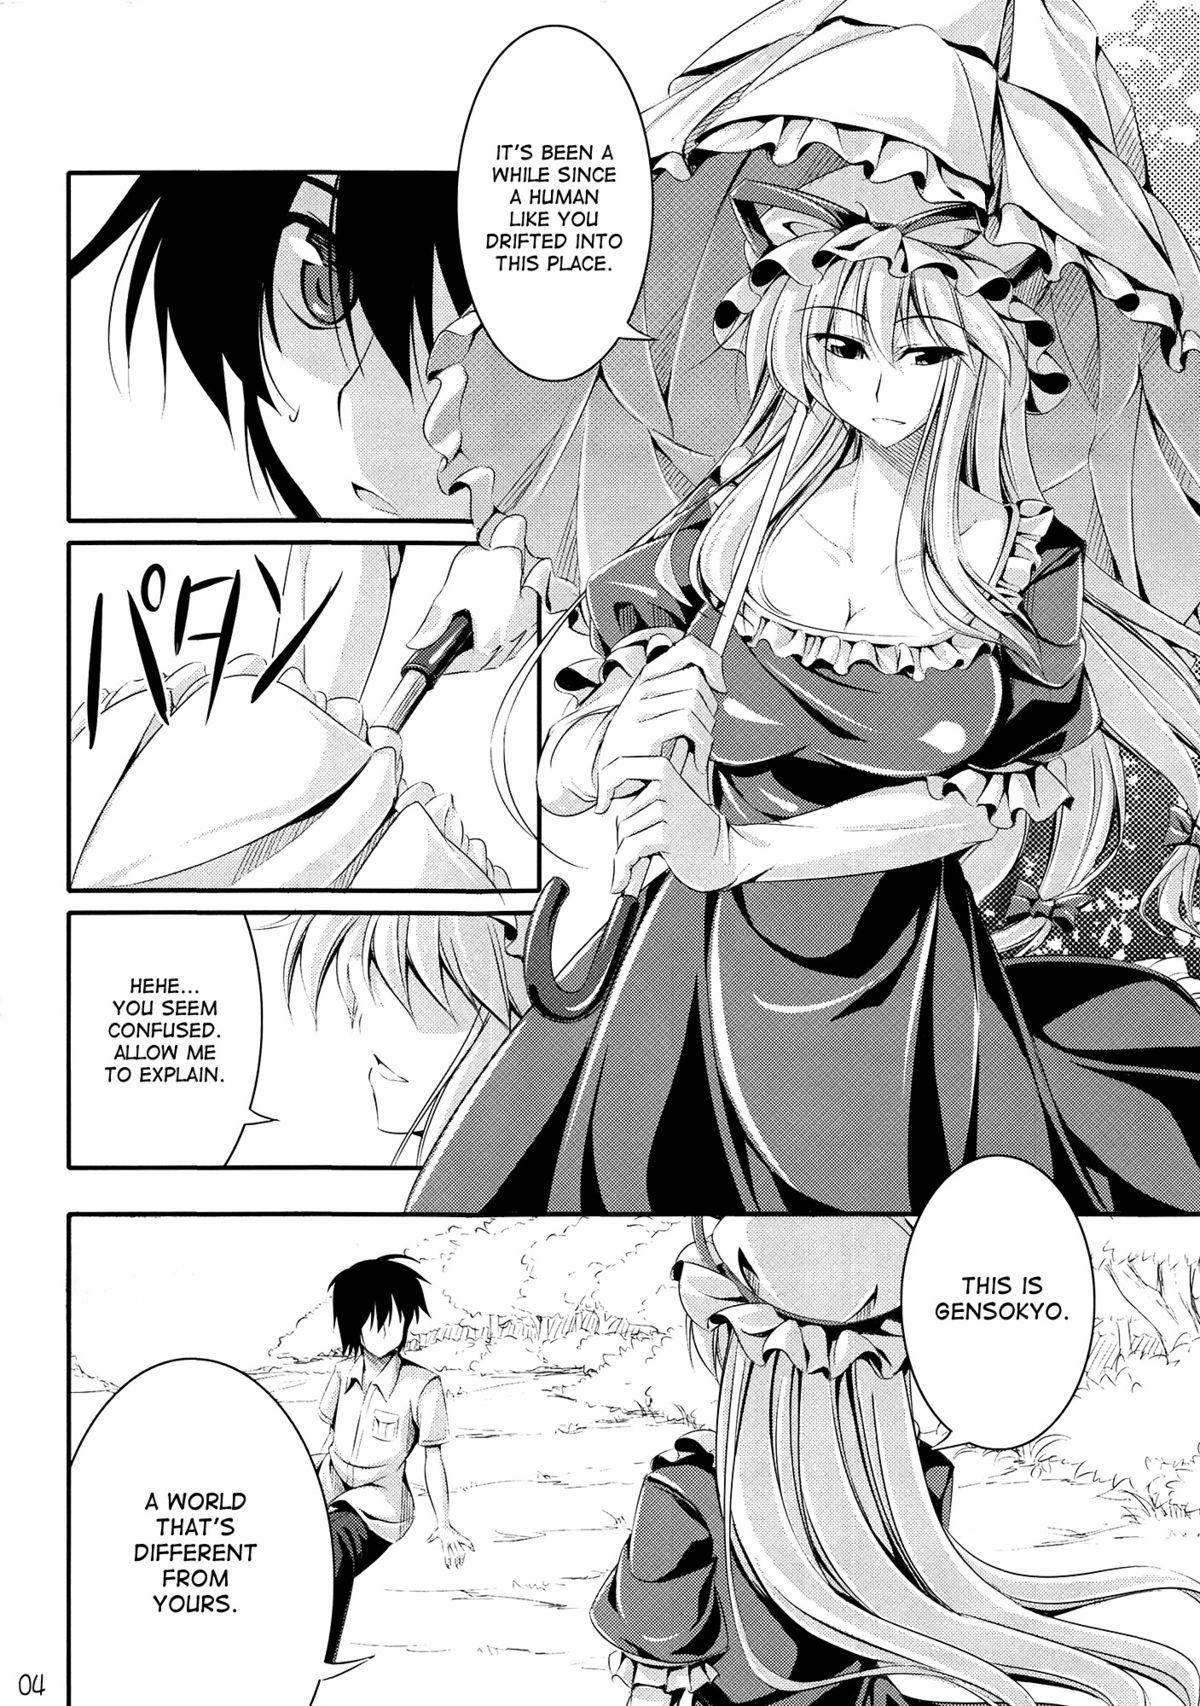 Gay Bareback Welcome to Wonder World - Touhou project 18 Year Old - Page 3